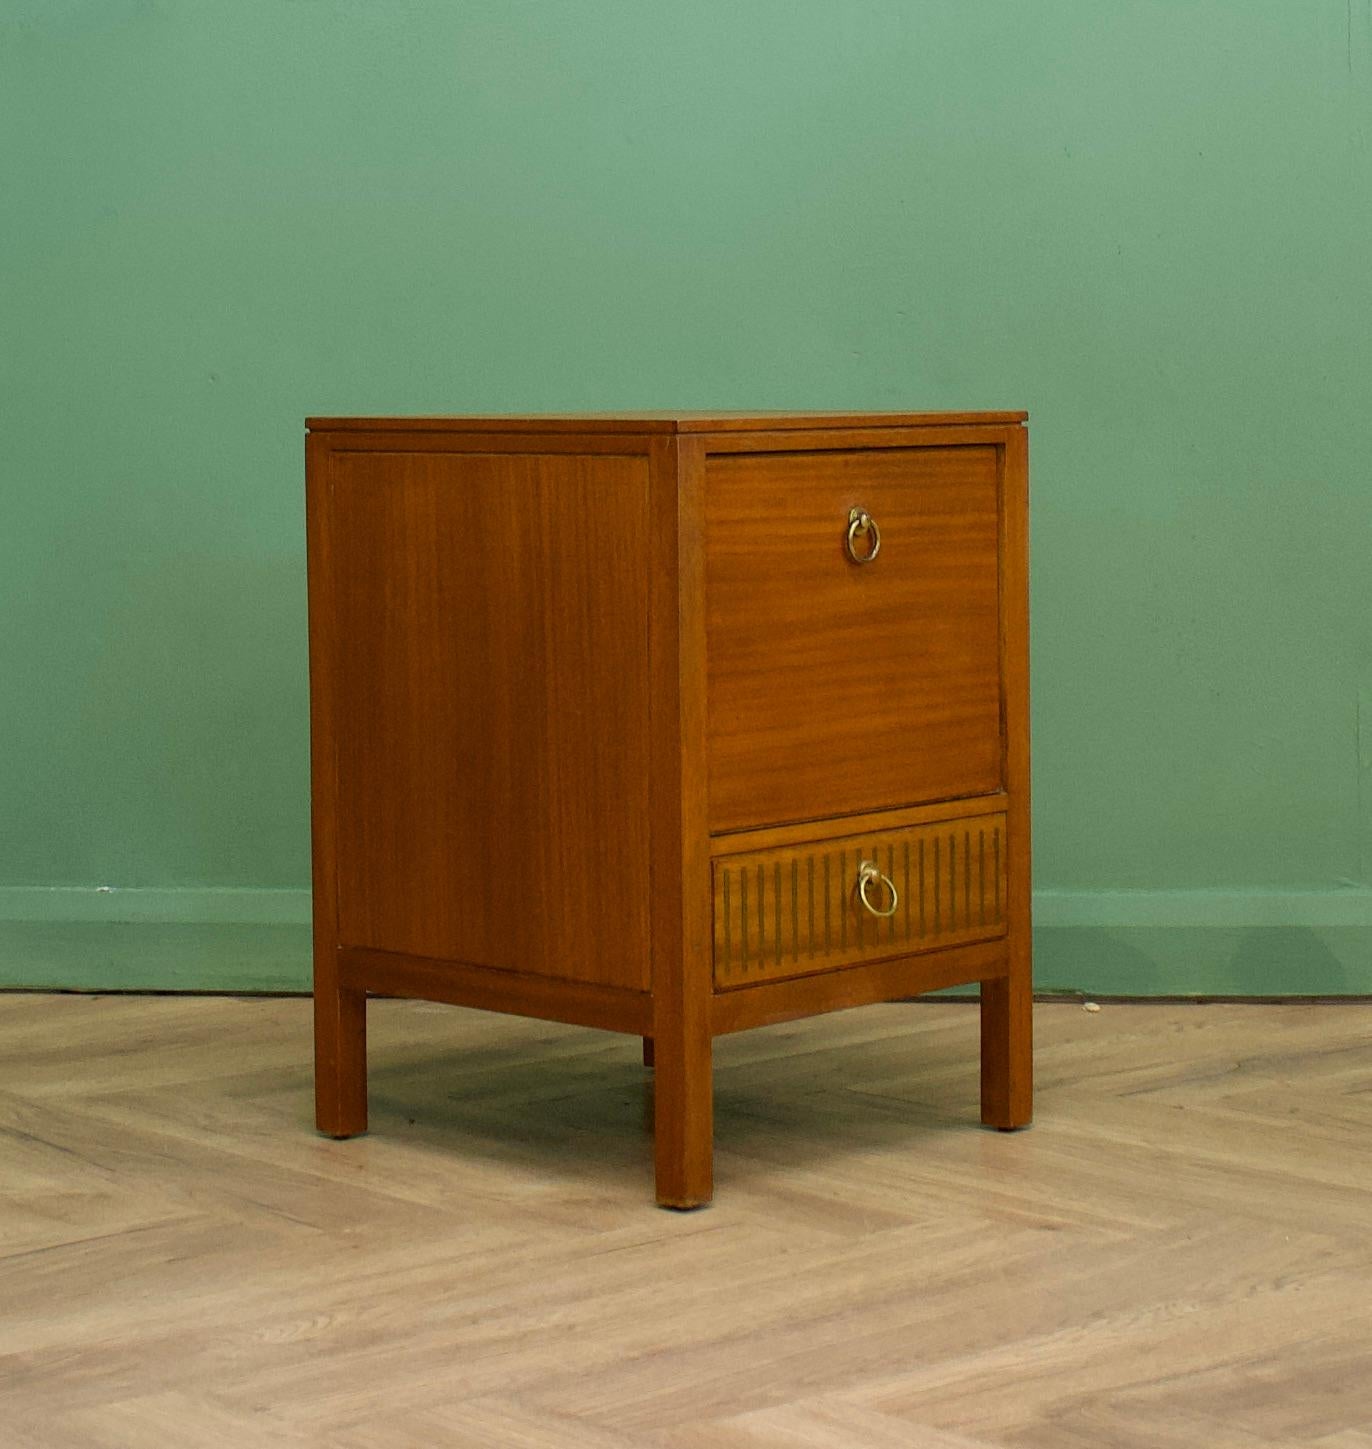 A teak  bedside table from Loughborough Furniture - retailed through Heals during the 1950s - designed by Neville Ward and Frank Austin
There are unusual brass inlay details to the bottom
This piece can be used as a lamp or side table also